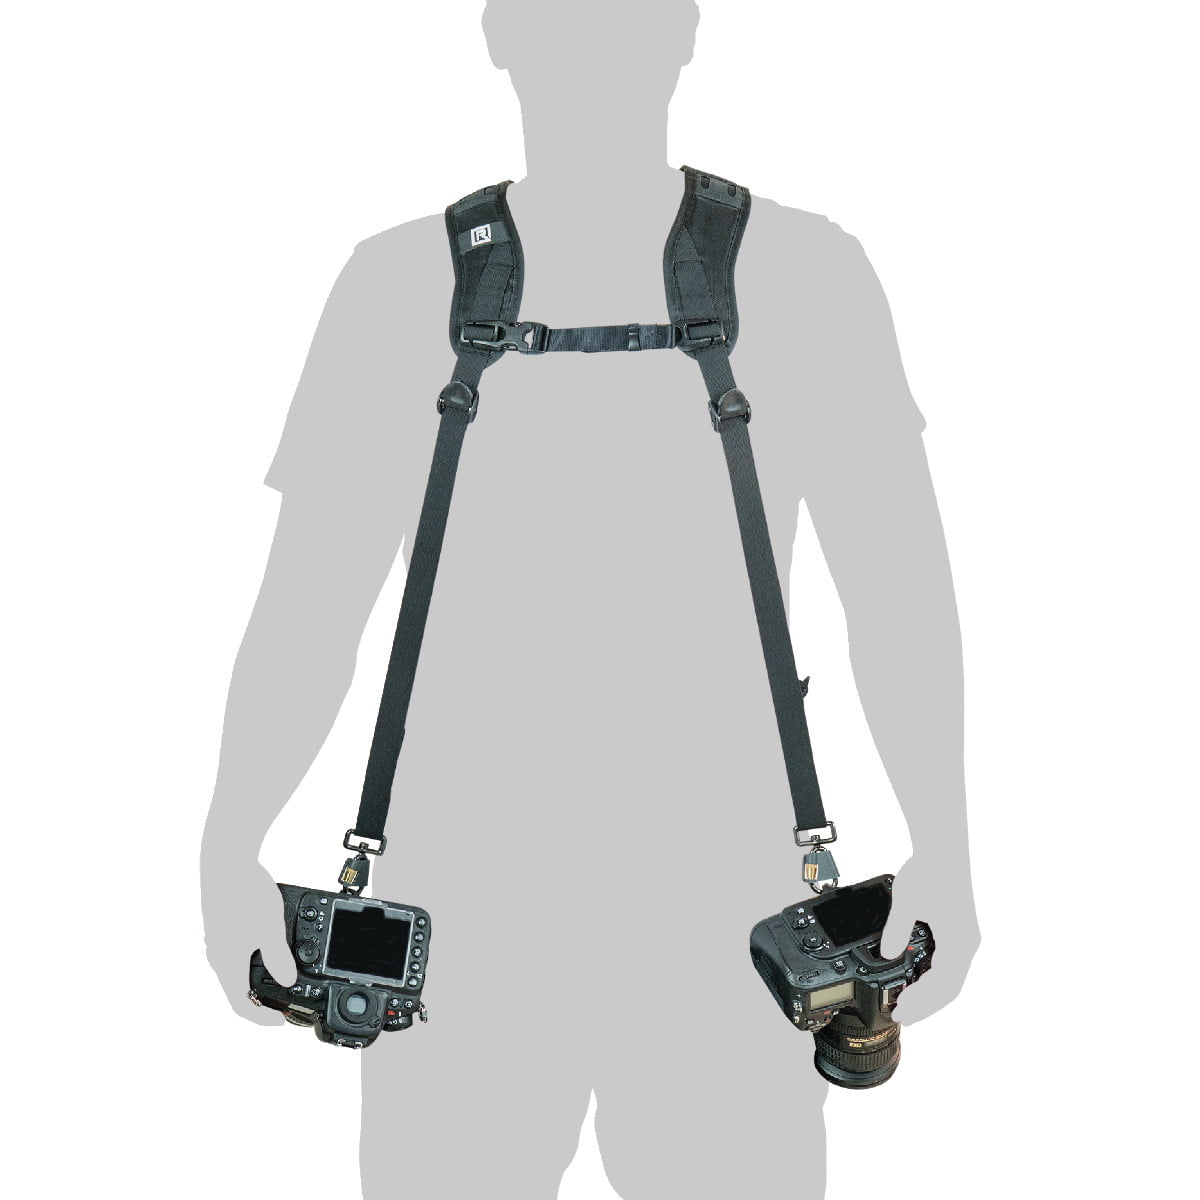 Our Best Selling Dual Camera Harness - BLACKRAPID